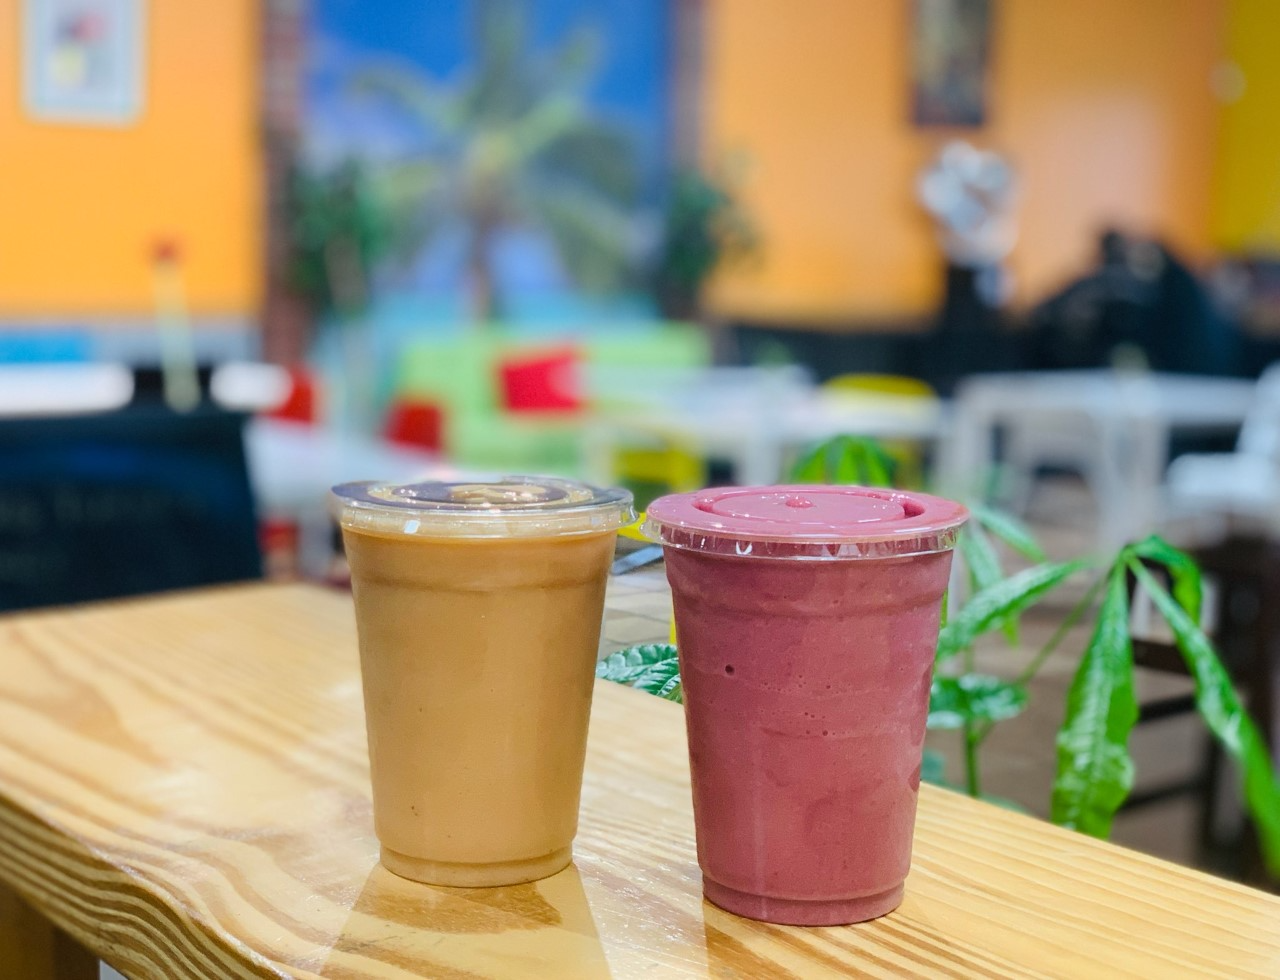 A photo of a pink smoothie next to a yellow smoothie